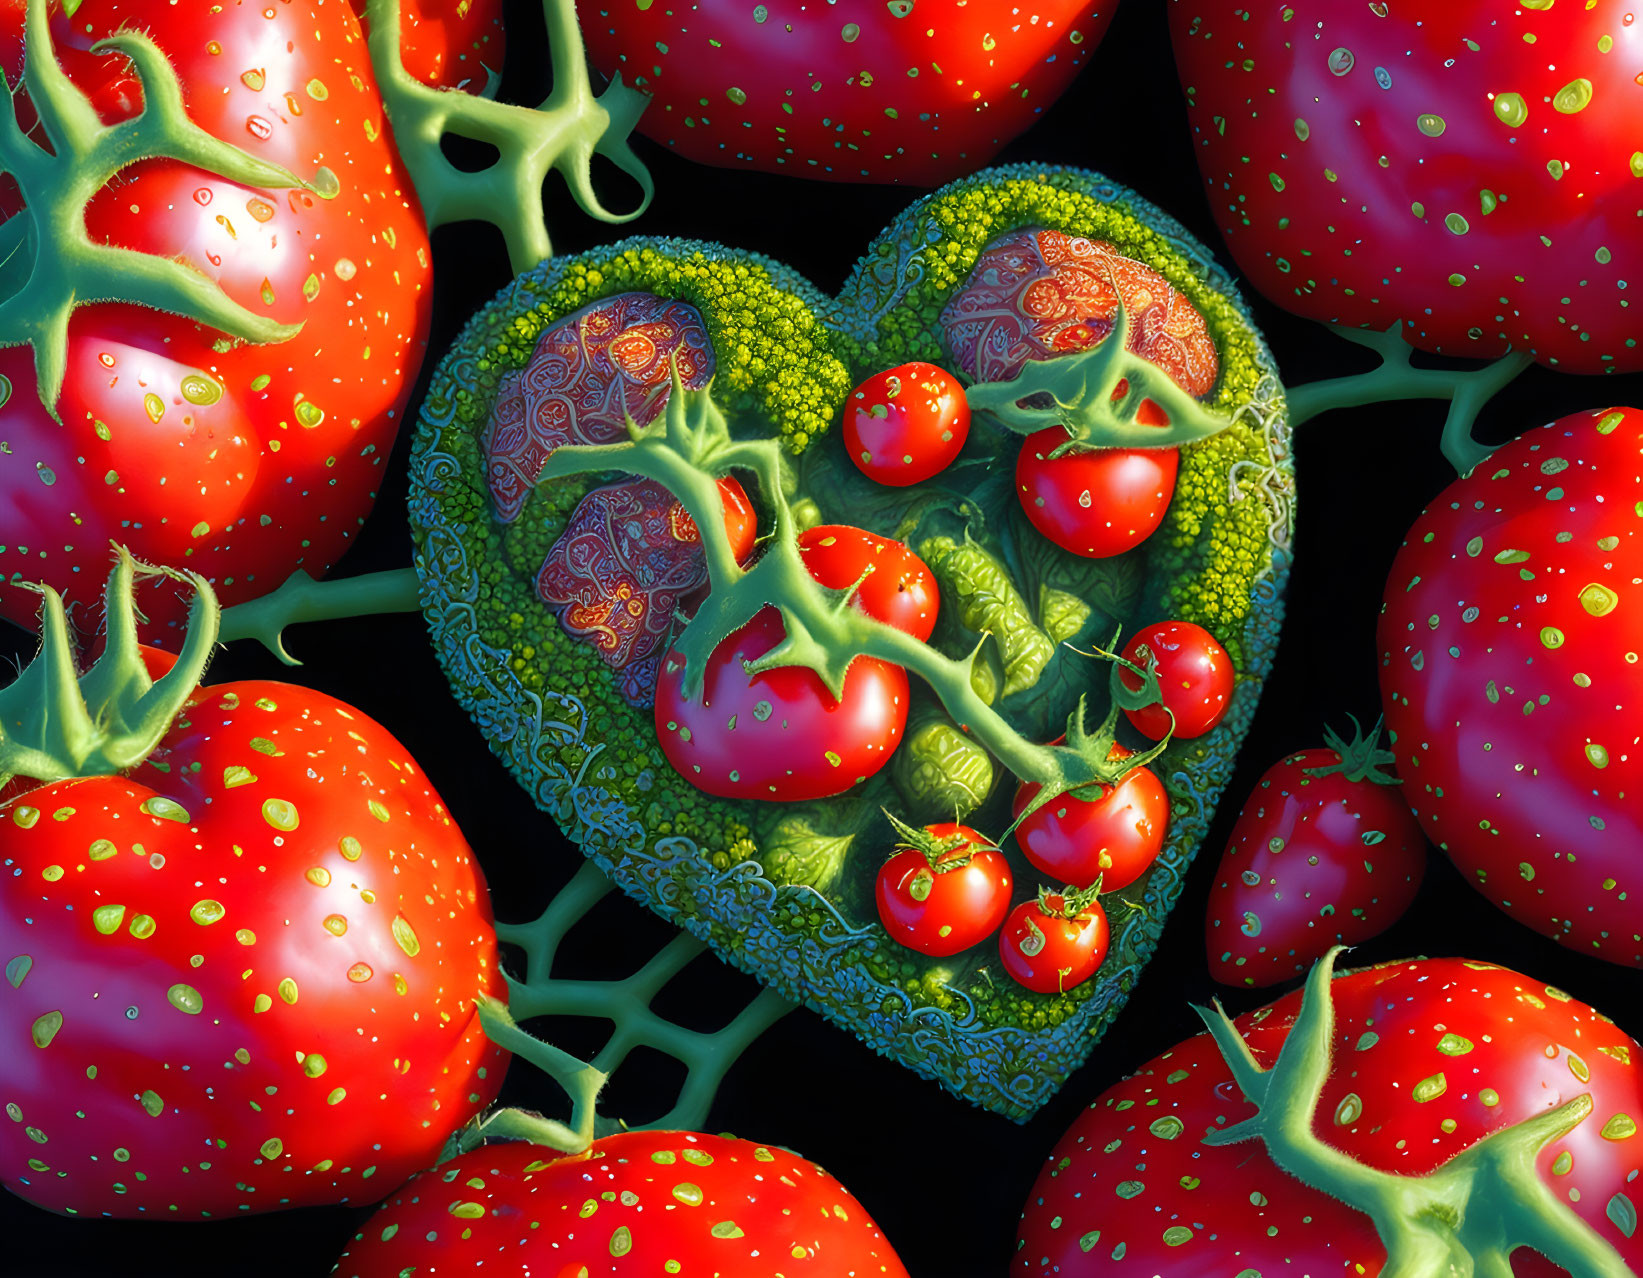 Heart-shaped broccoli patch with red tomatoes on dark background